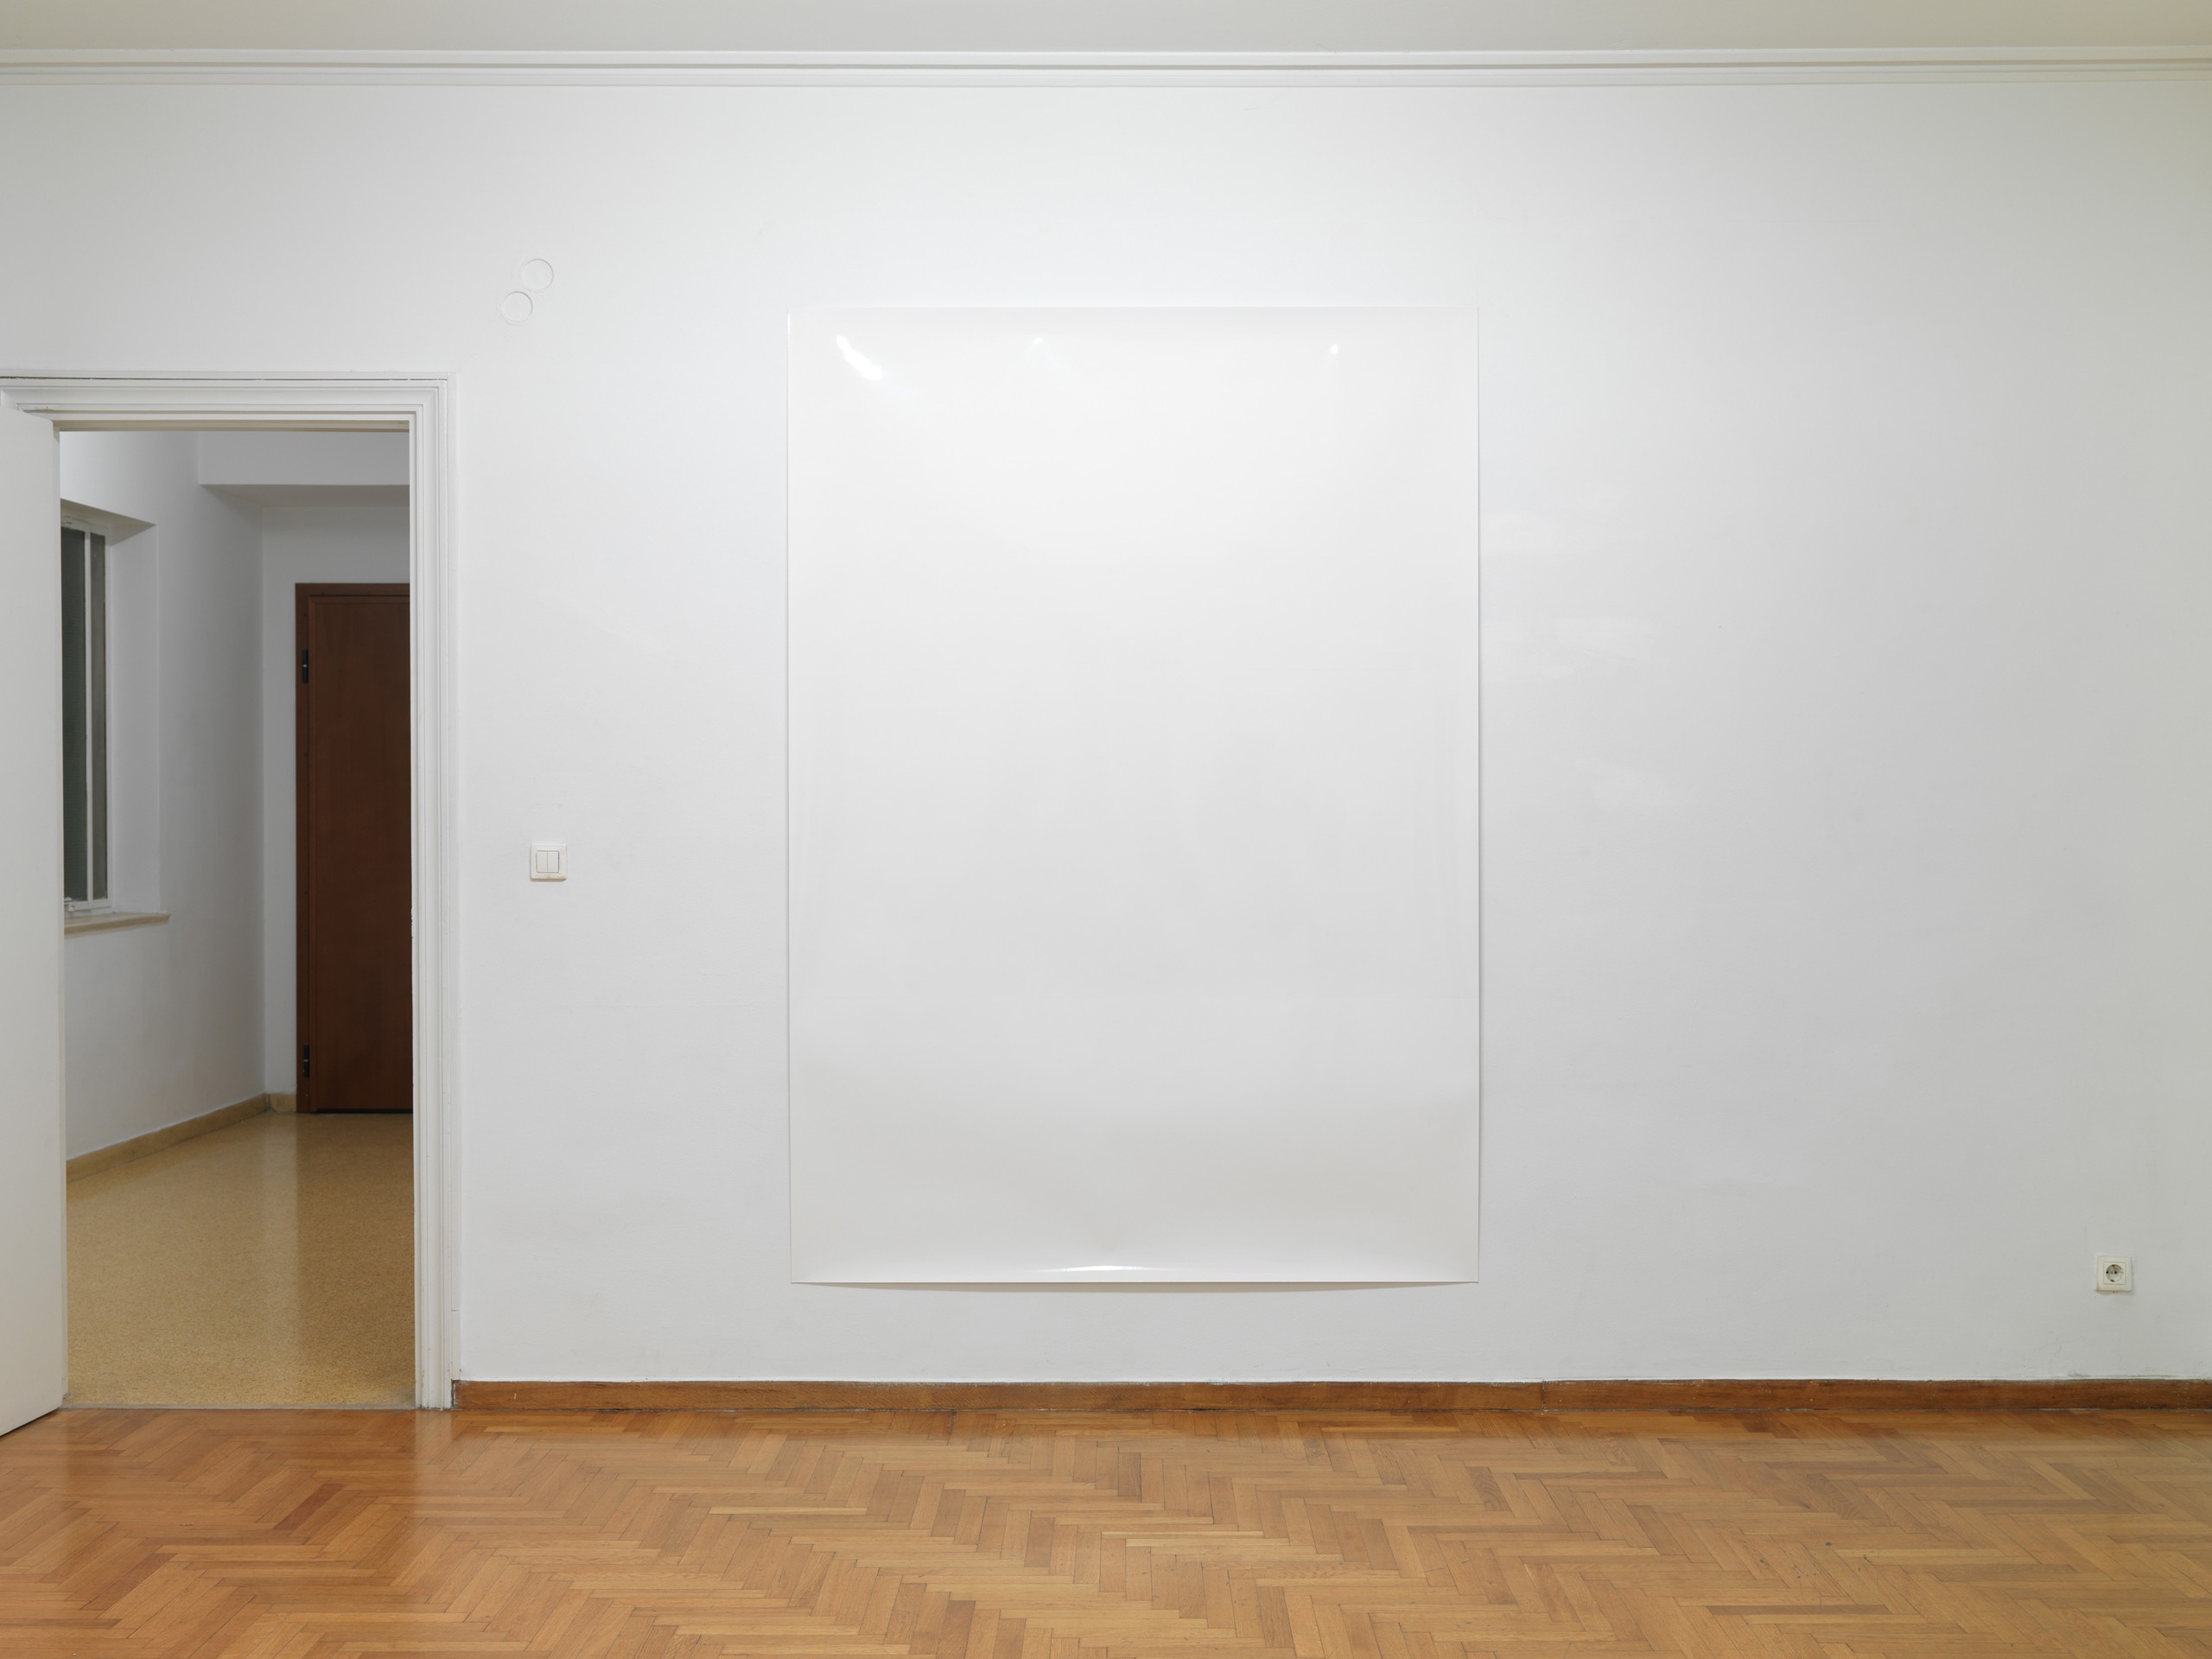 Installation view, Ύλη[matter]HYLE, Athens, 2020